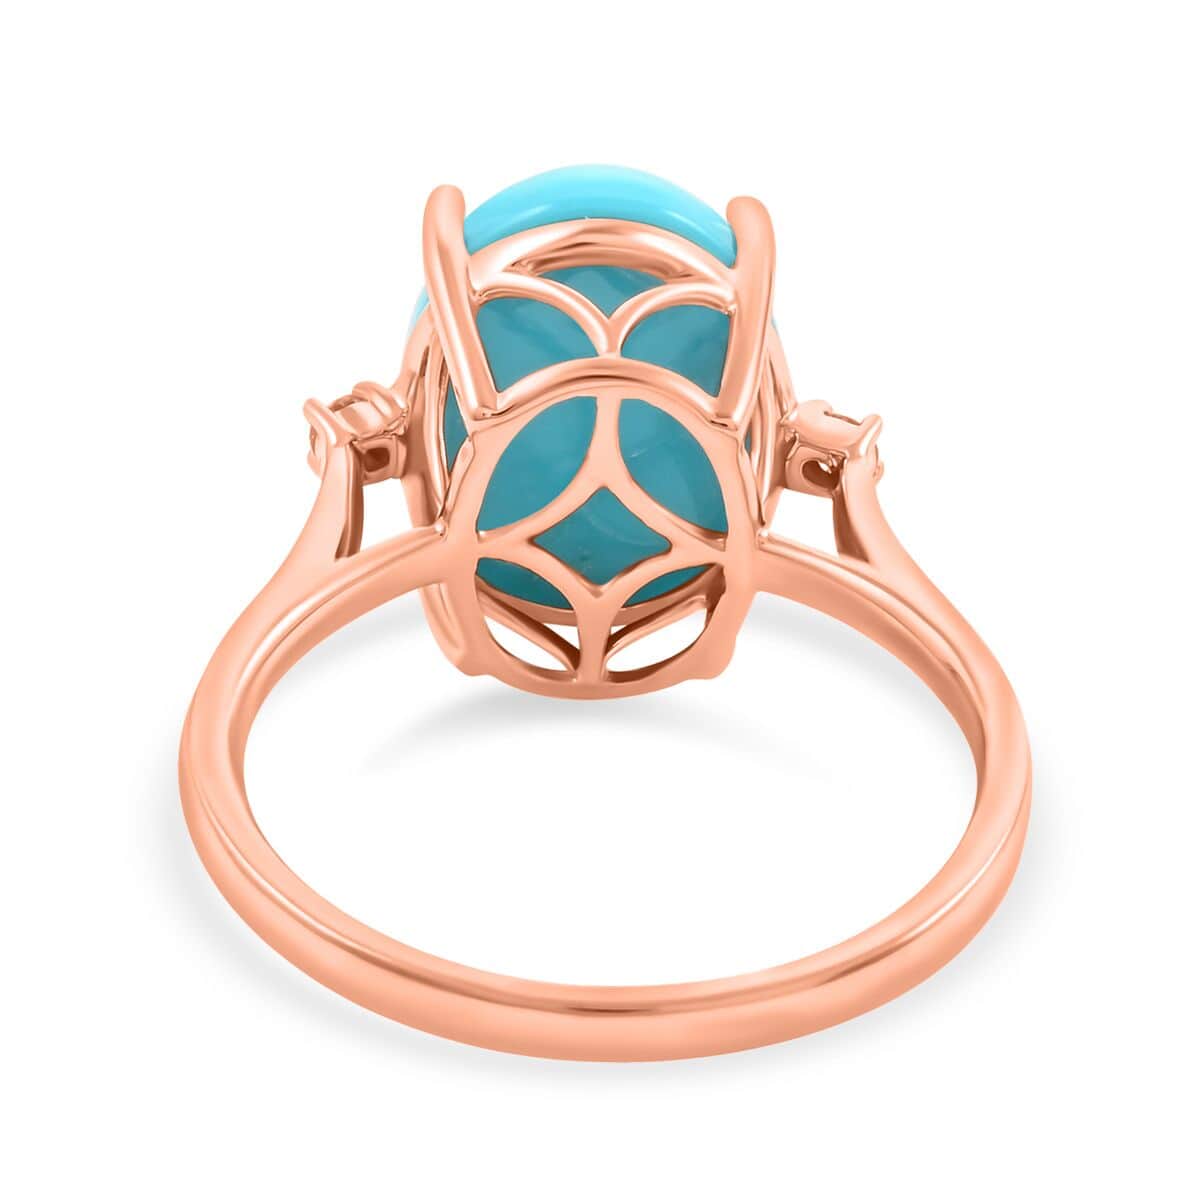 Certified & Appraised Luxoro 10K Rose Gold AAA Sleeping Beauty Turquoise and I2 Diamond Ring 5.50 ctw (Del. in 7-10 Days) image number 4